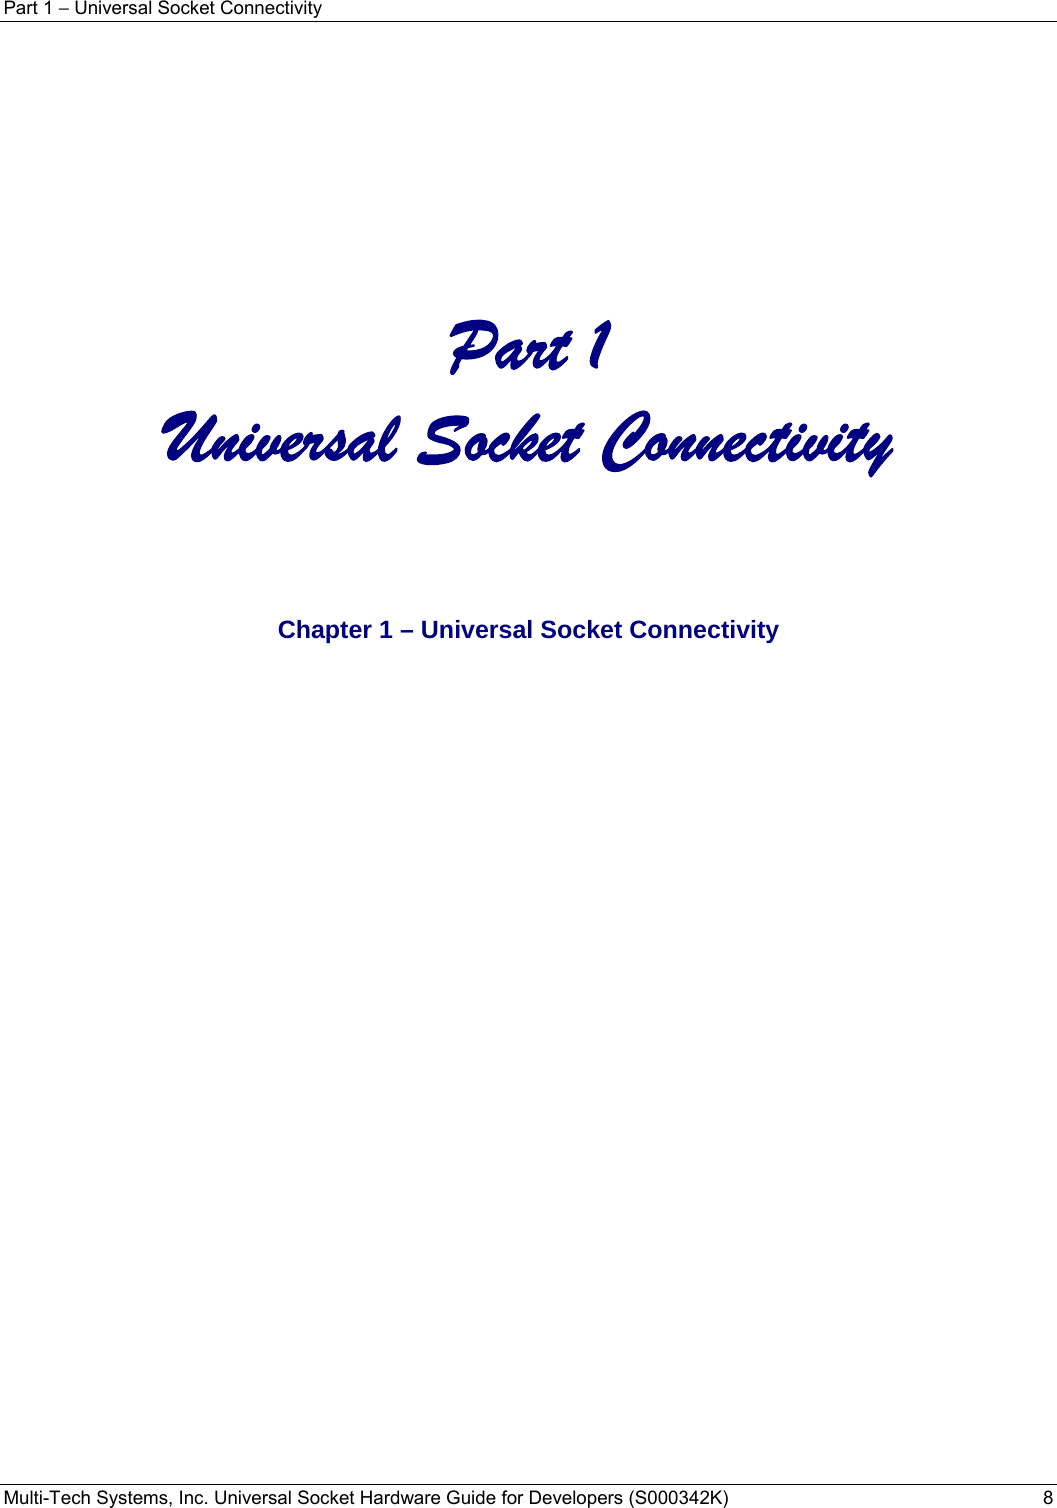 Part 1 − Universal Socket Connectivity Multi-Tech Systems, Inc. Universal Socket Hardware Guide for Developers (S000342K)  8           Part 1 Universal Socket Connectivity     Chapter 1 – Universal Socket Connectivity   